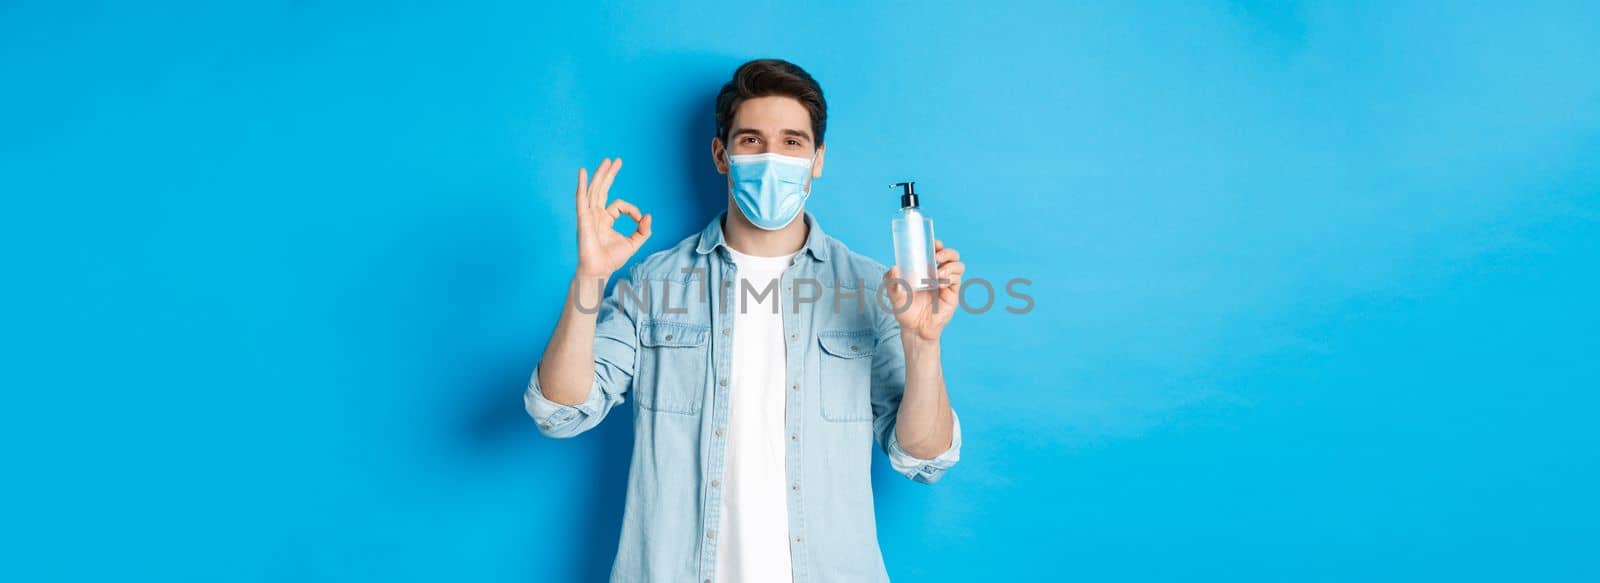 Concept of covid-19, pandemic and social distancing. Satisfied young man in medical mask recommending hand sanitizer, showing ok sign and antiseptic, standing against blue background.